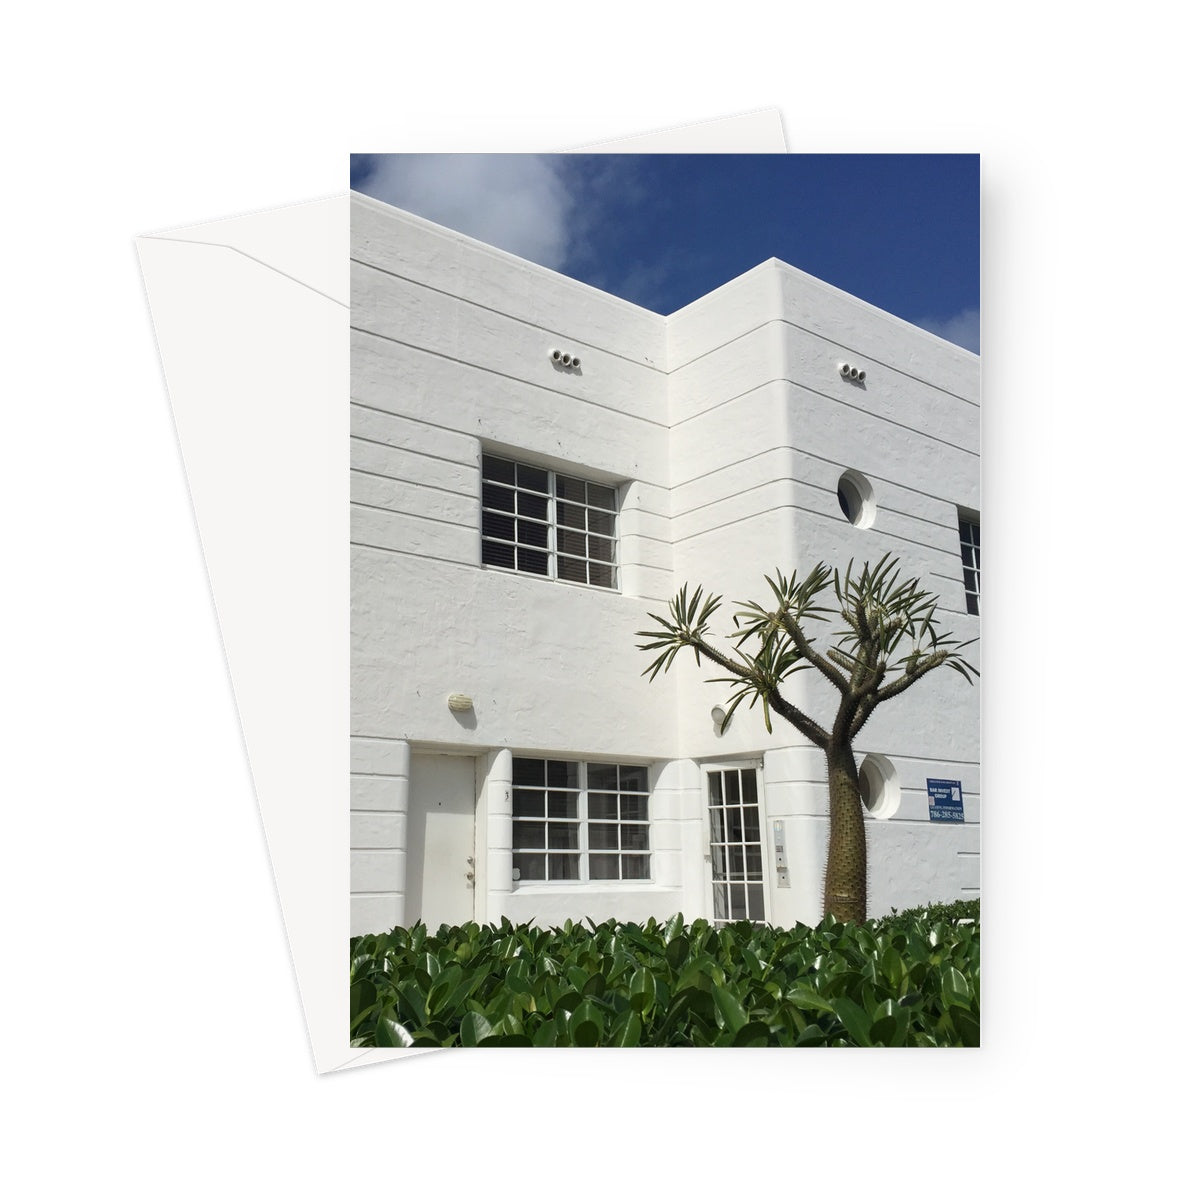 This greeting card shows a white Art Deco building with geometric shapes next to a lovely Madagascar palm in the front garden.